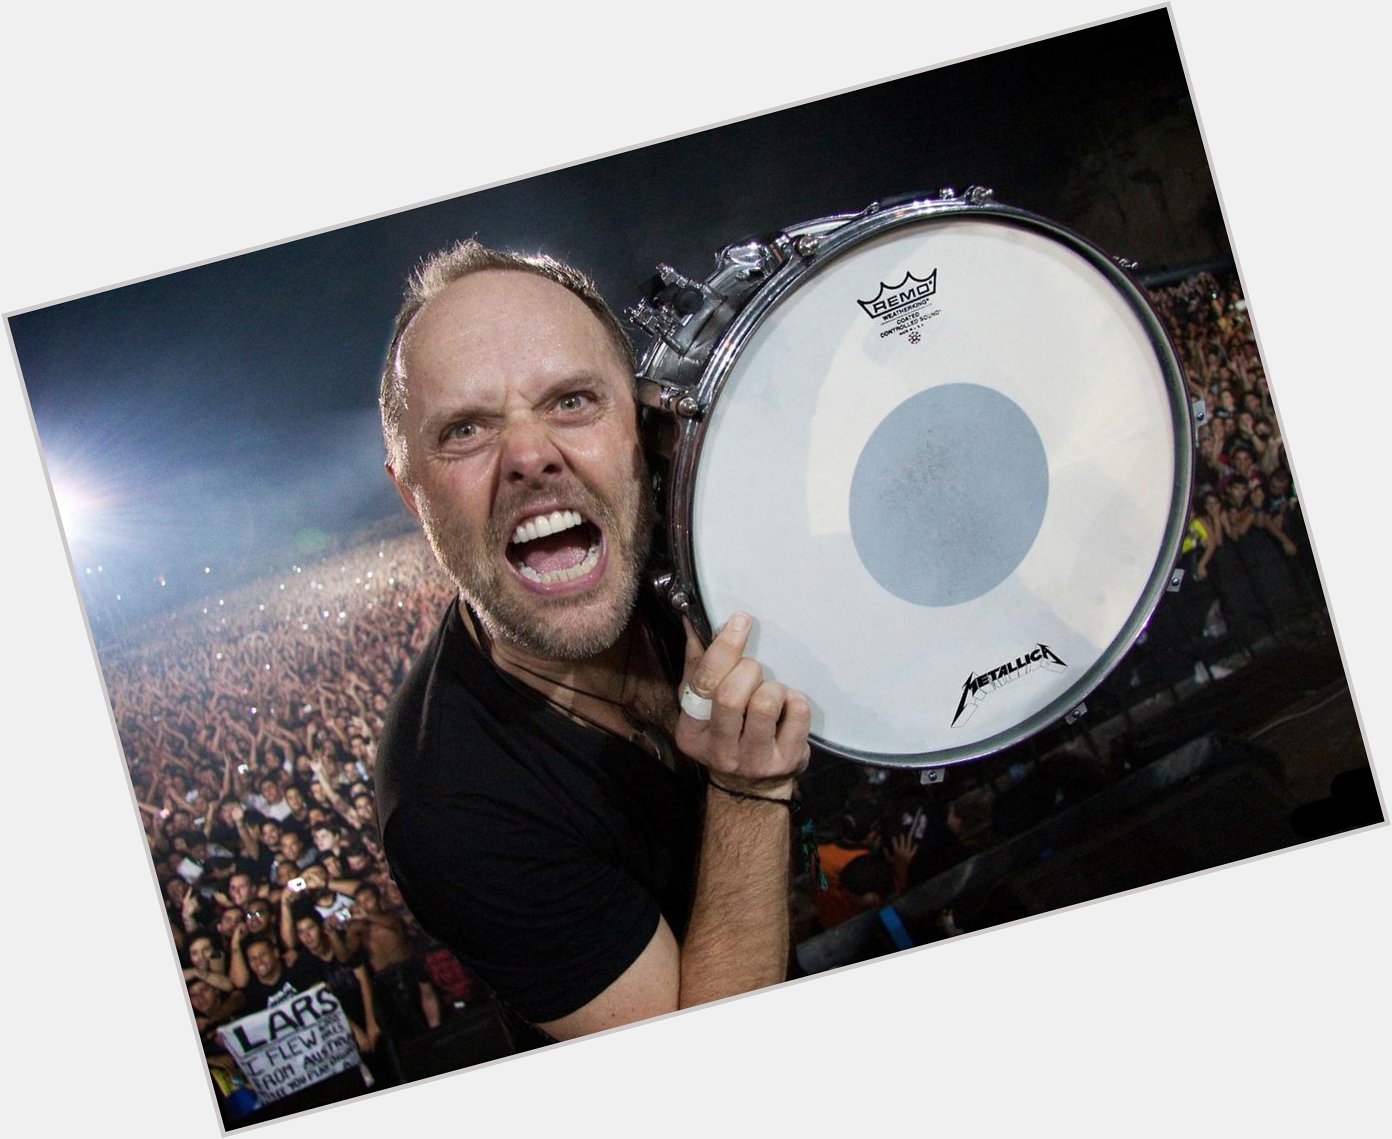 Happy 51st birthday to Lars Ulrich of  